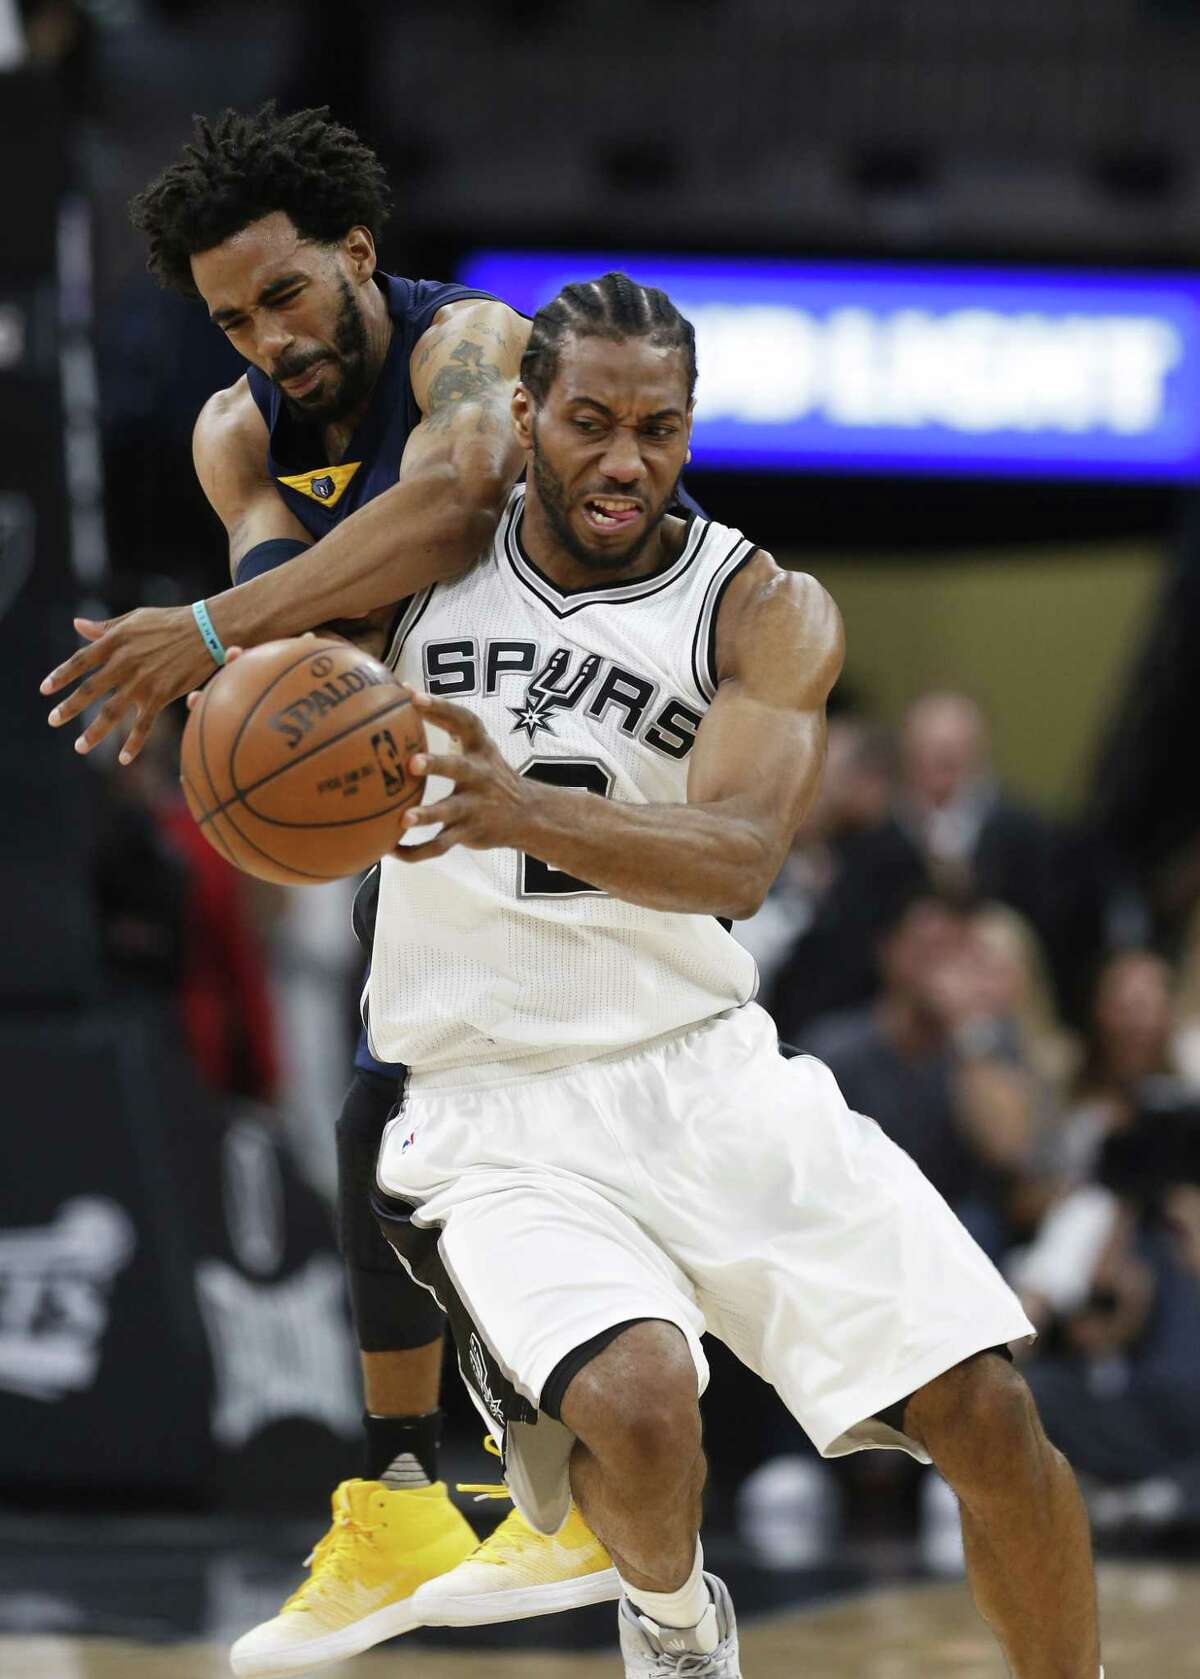 Spurs’ Kawhi Leonard steals an inbound pass against the Memphis Grizzlies’ Mike Conley during Game 5 of the Western Conference playoffs at the AT&T Center on April 25, 2017.